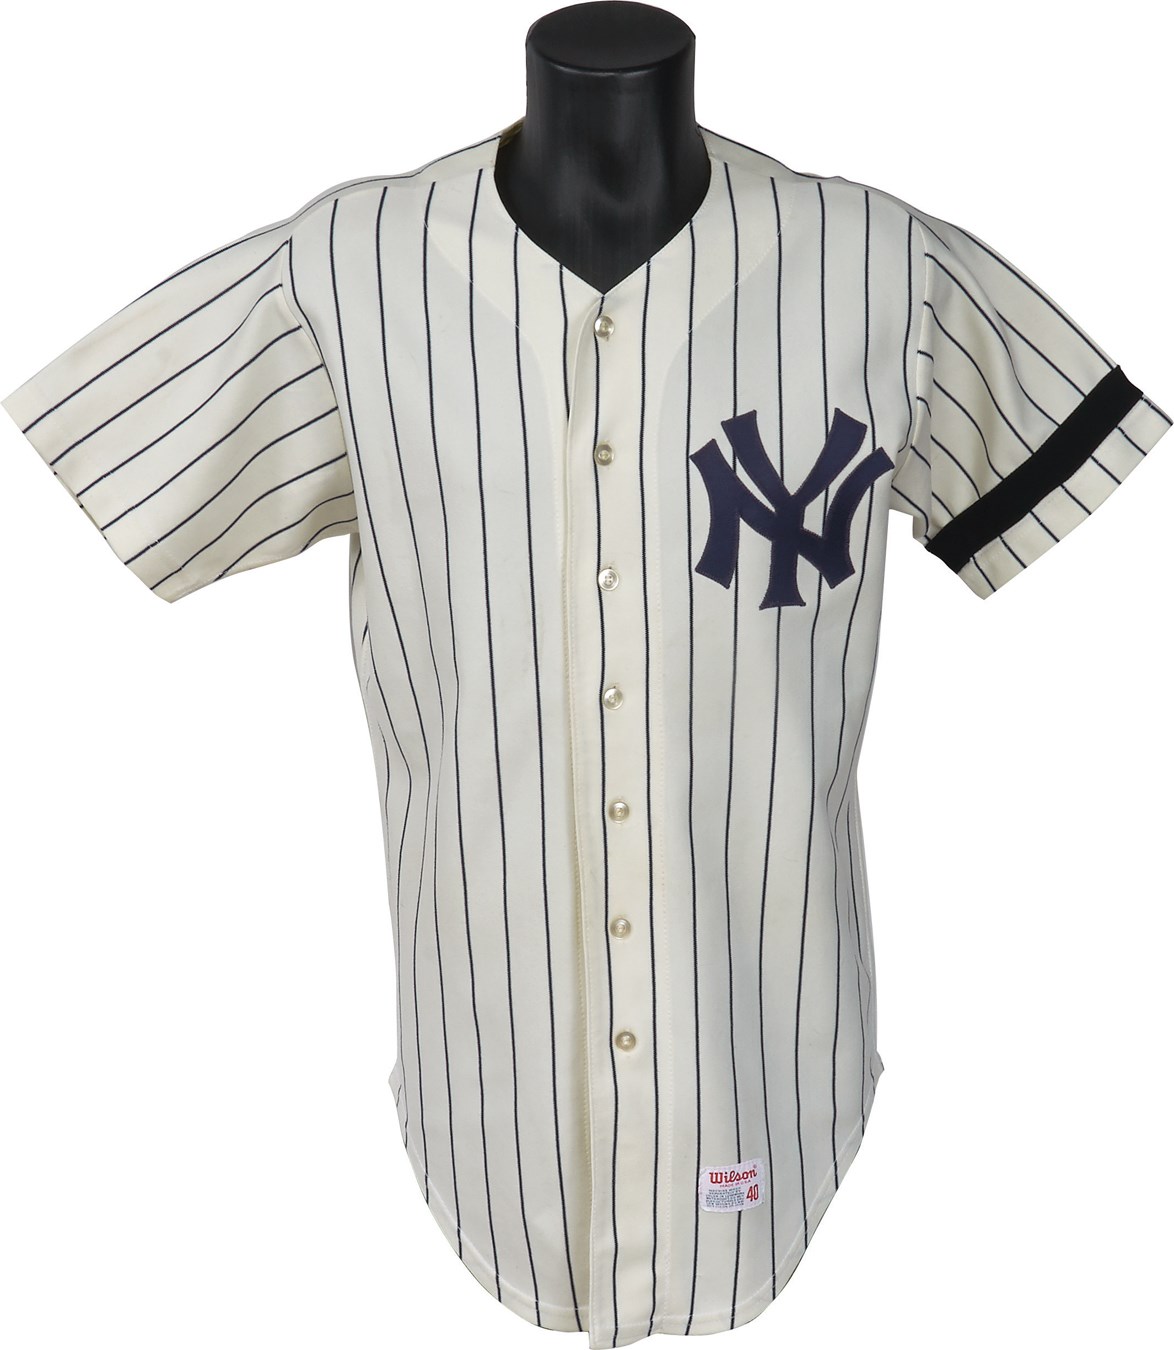 NY Yankees, Giants & Mets - 1978 Willie Randolph Game Worn World Series Game 2 Yankees Jersey (Photomatched)